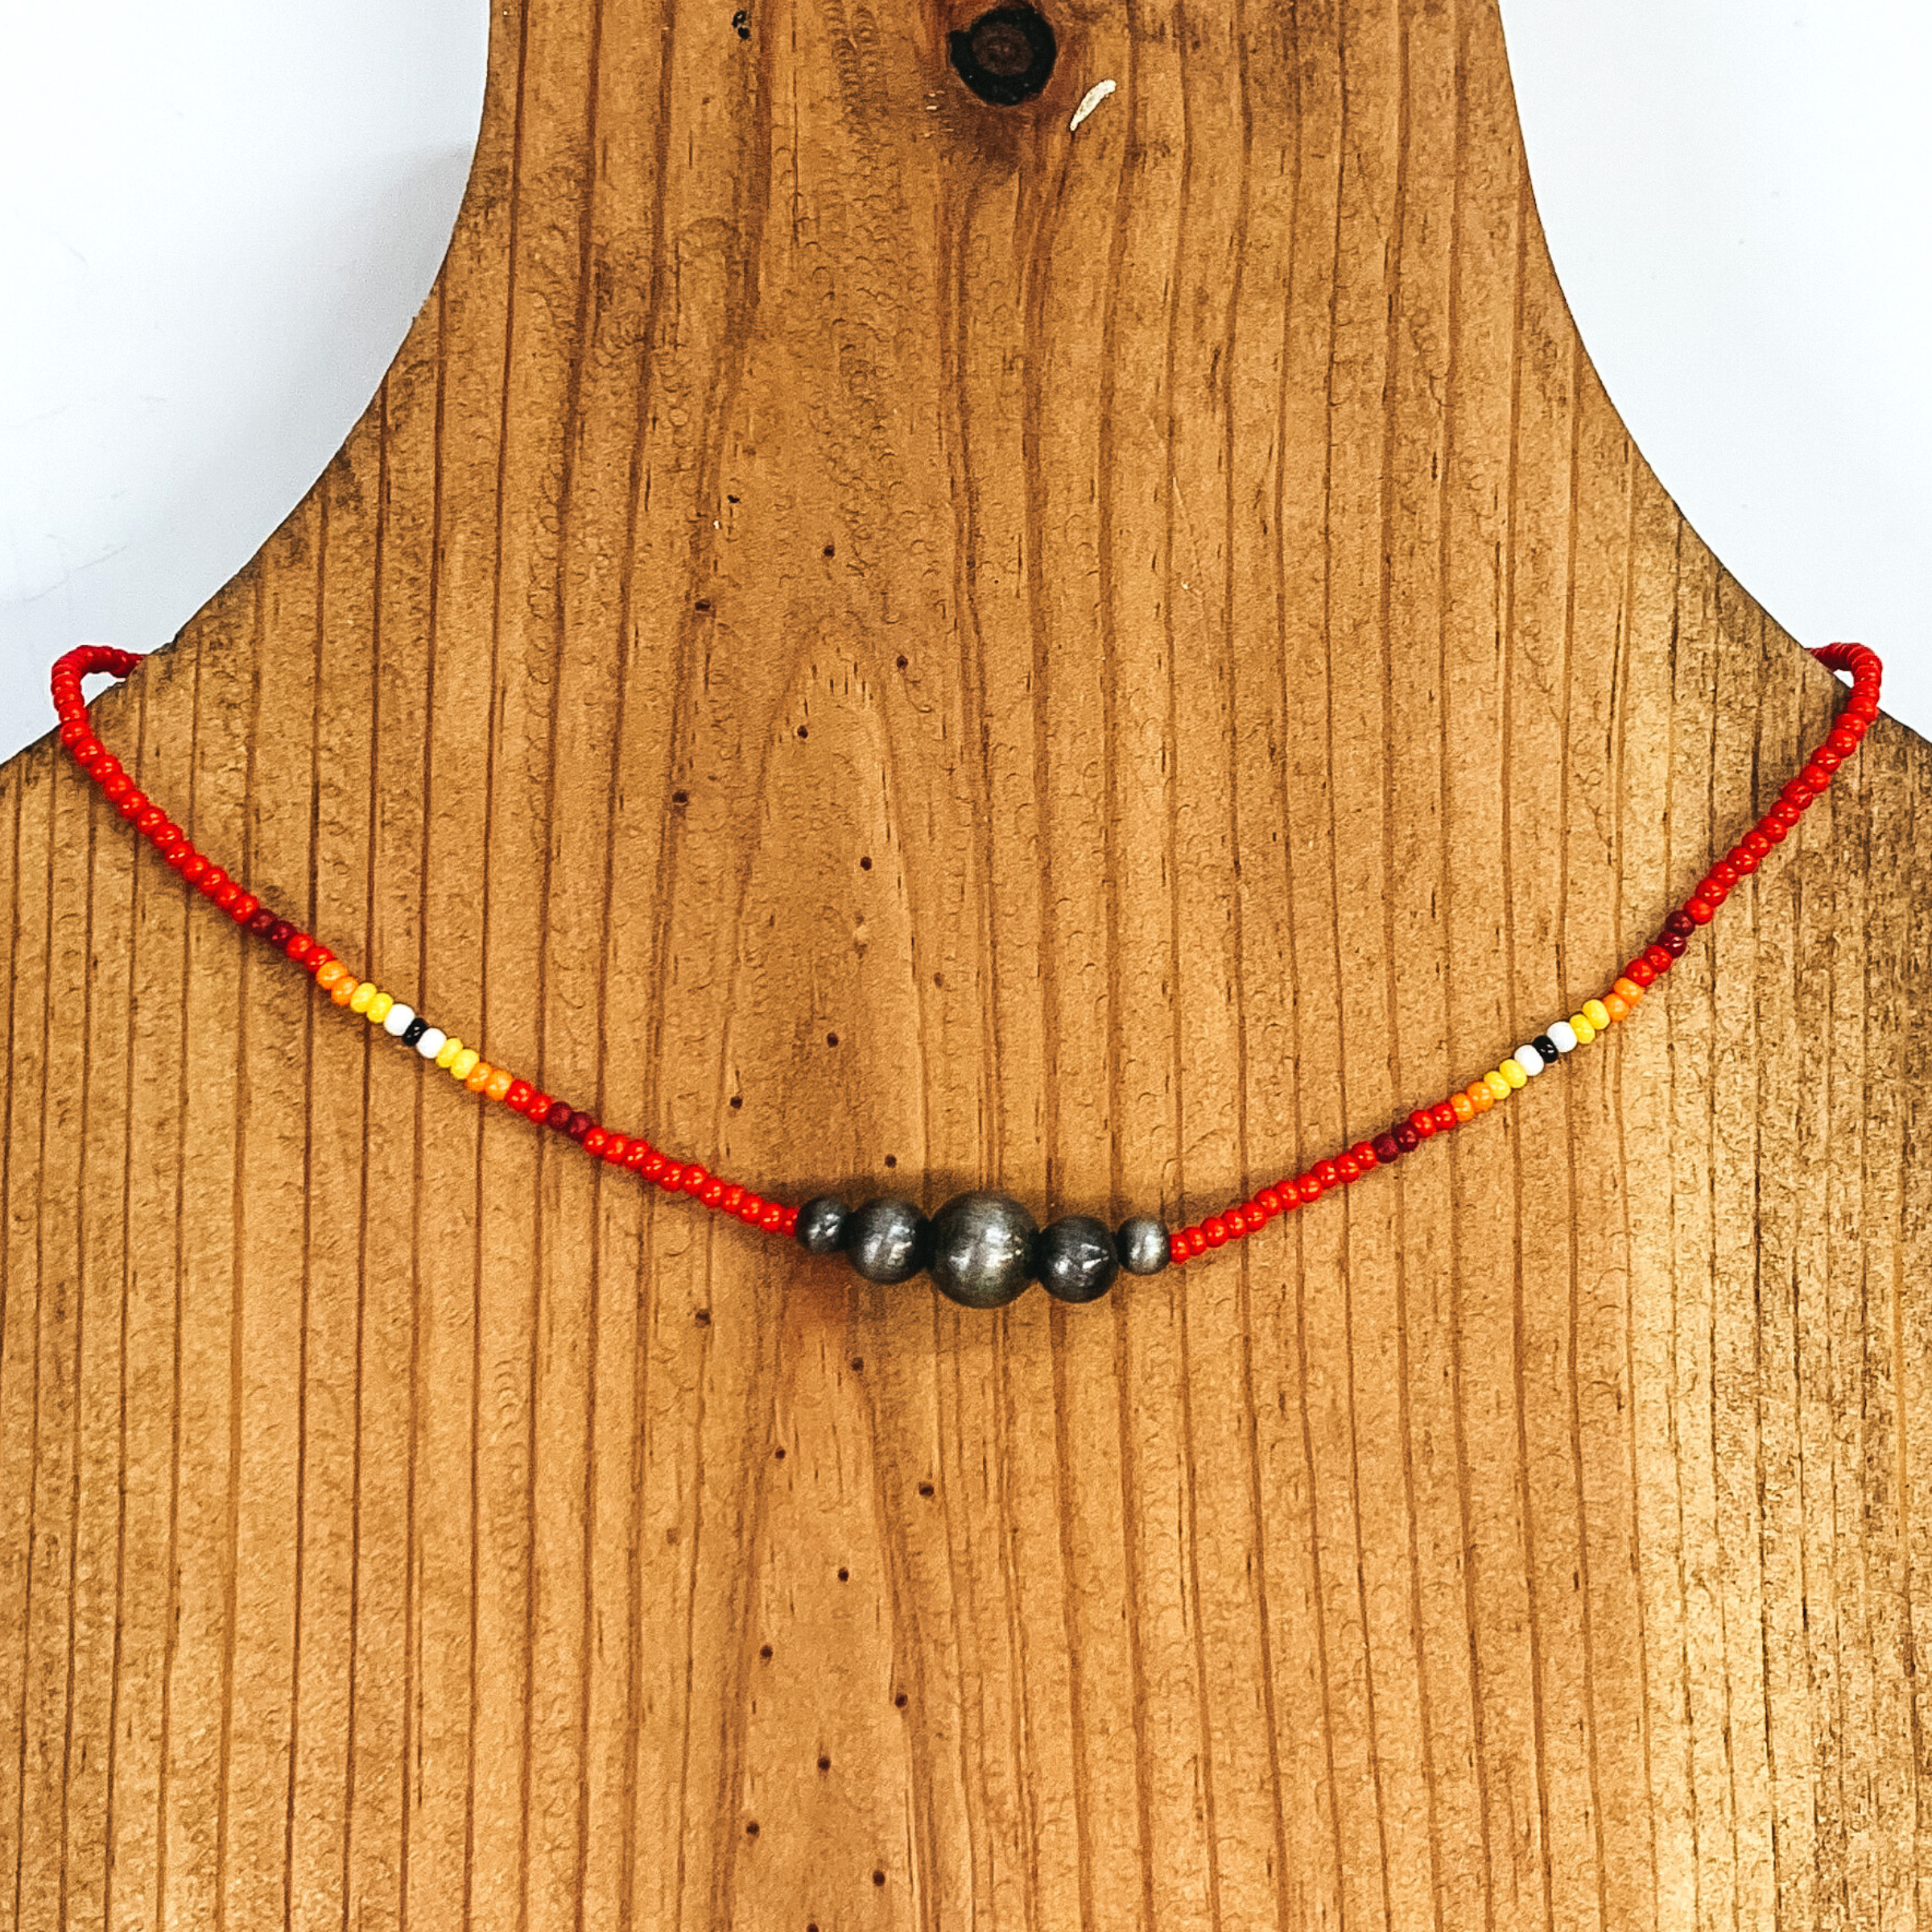 Red beaded necklace with center silver beads of varying sizes. On each side of the silver, center beads there is a segment the has black center bead with white, yellow, orange, red, and maroon beads folowing on each side. This necklace is pictured on a wooden necklace holder on a white background. 